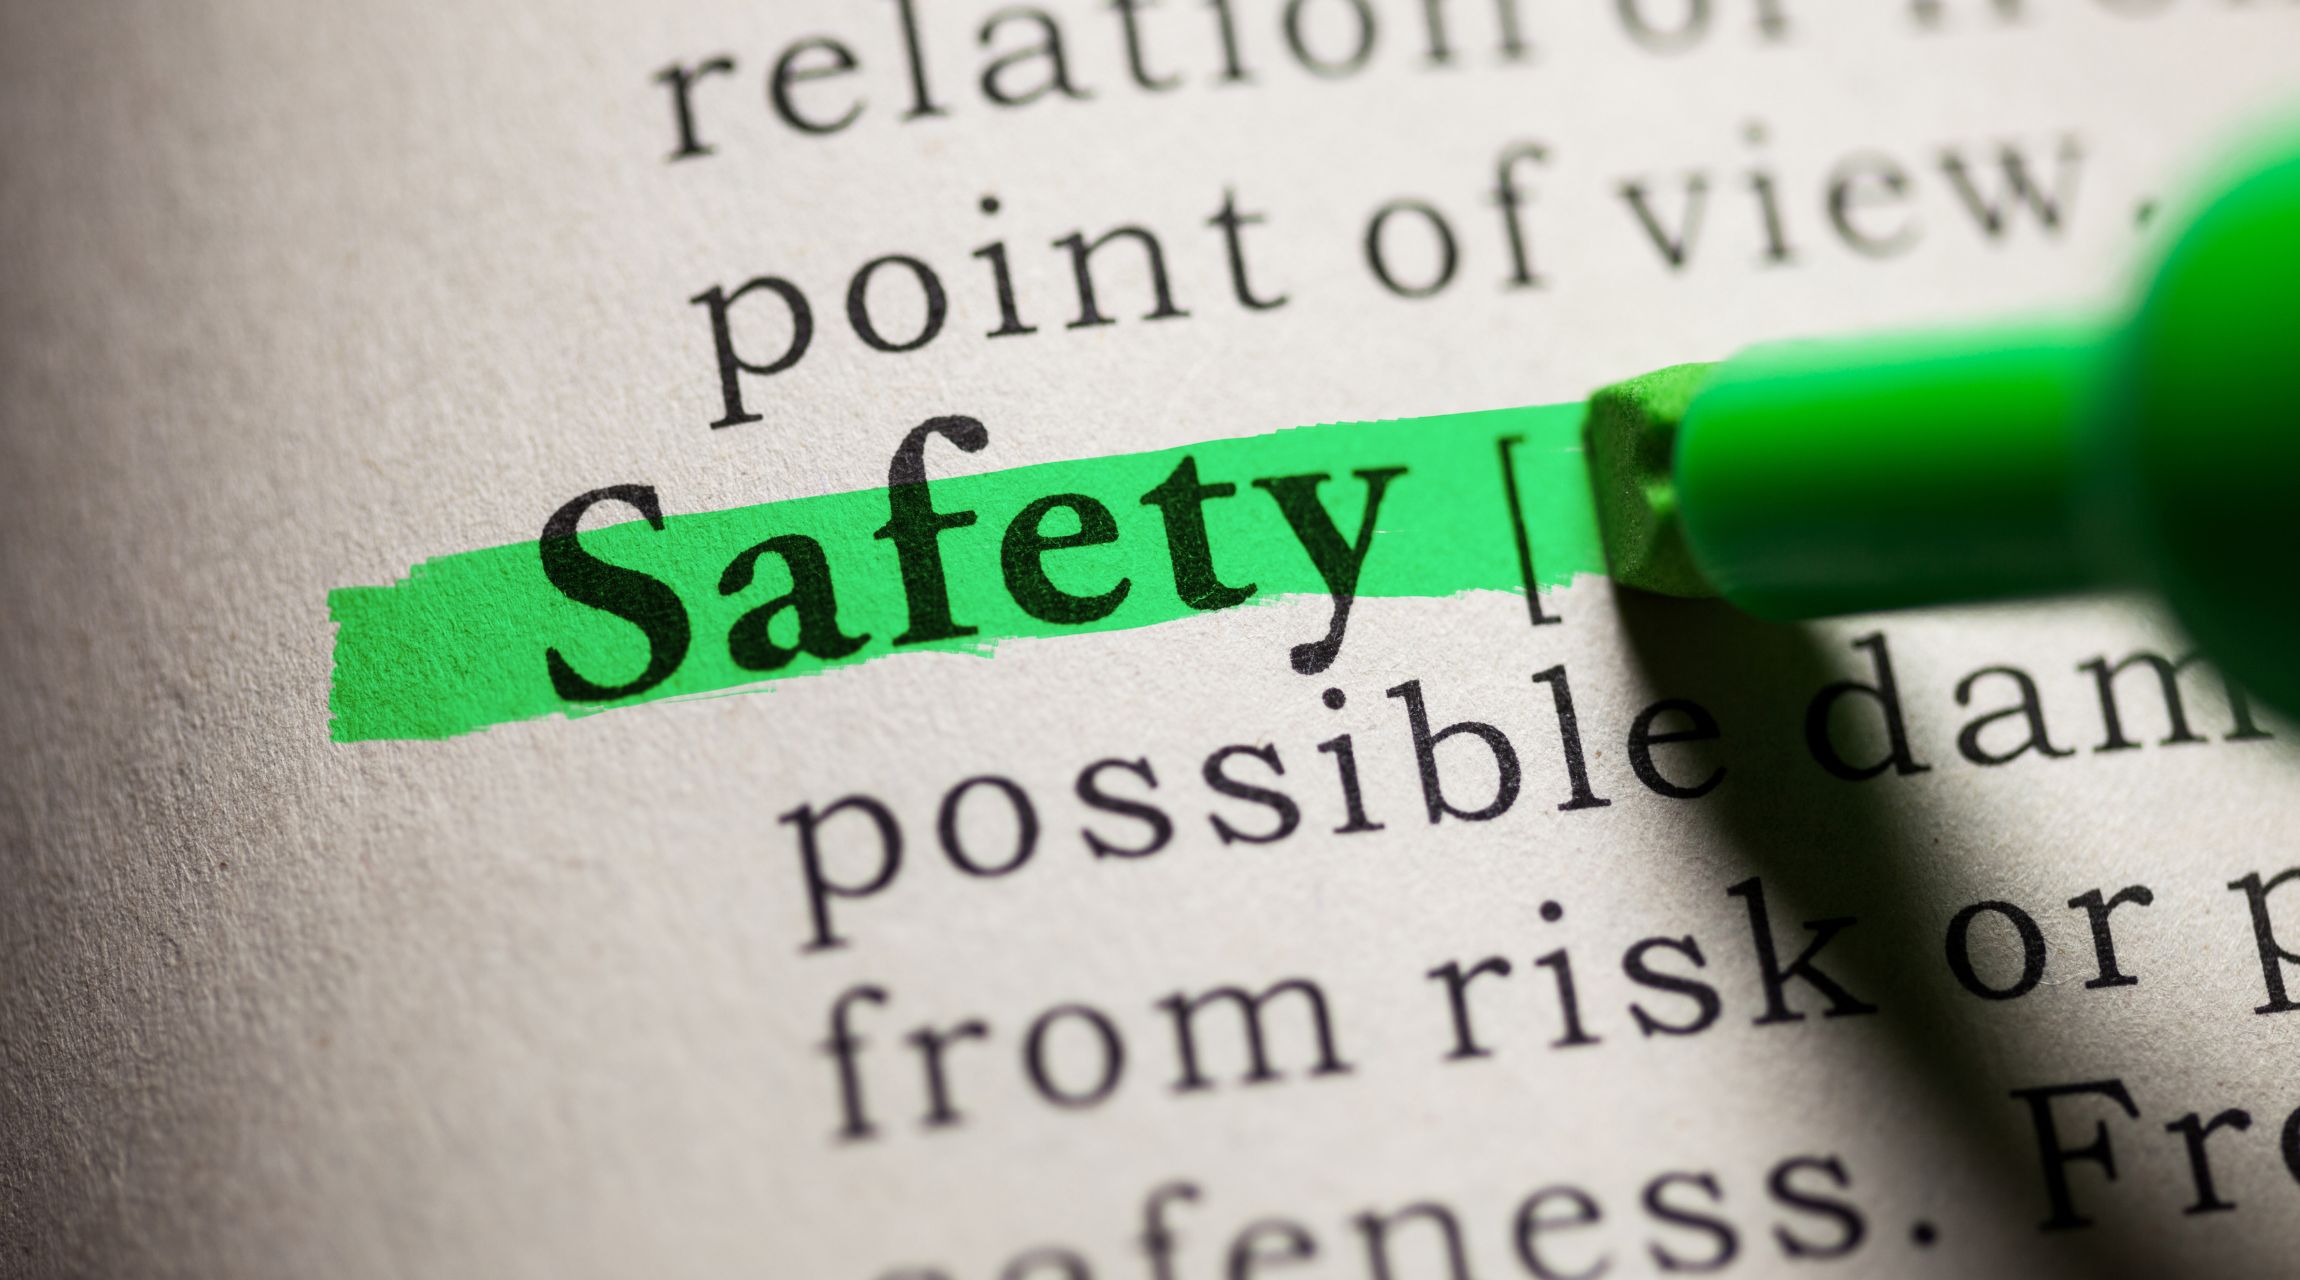 Pentony_Training_Services_Safety_Training_Meath_Louth (16)